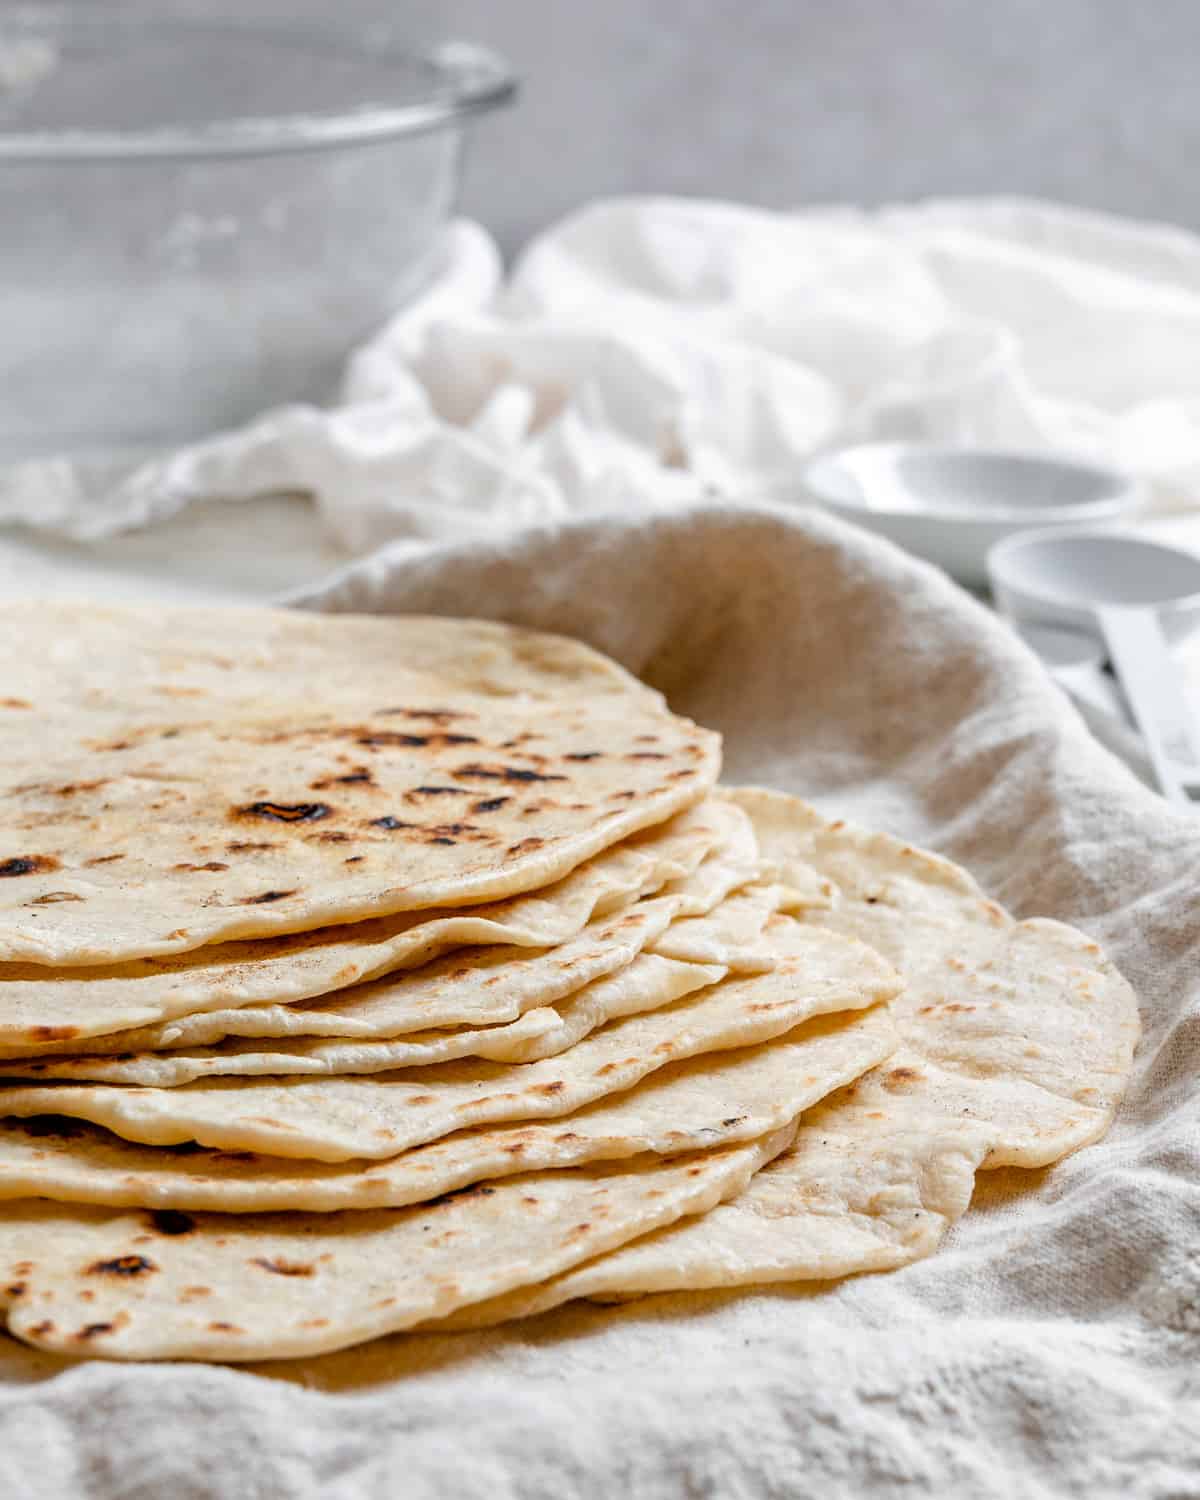 completed Tortillas de Harina – Handmade Flour Tortillas stacked on one another against a white surface